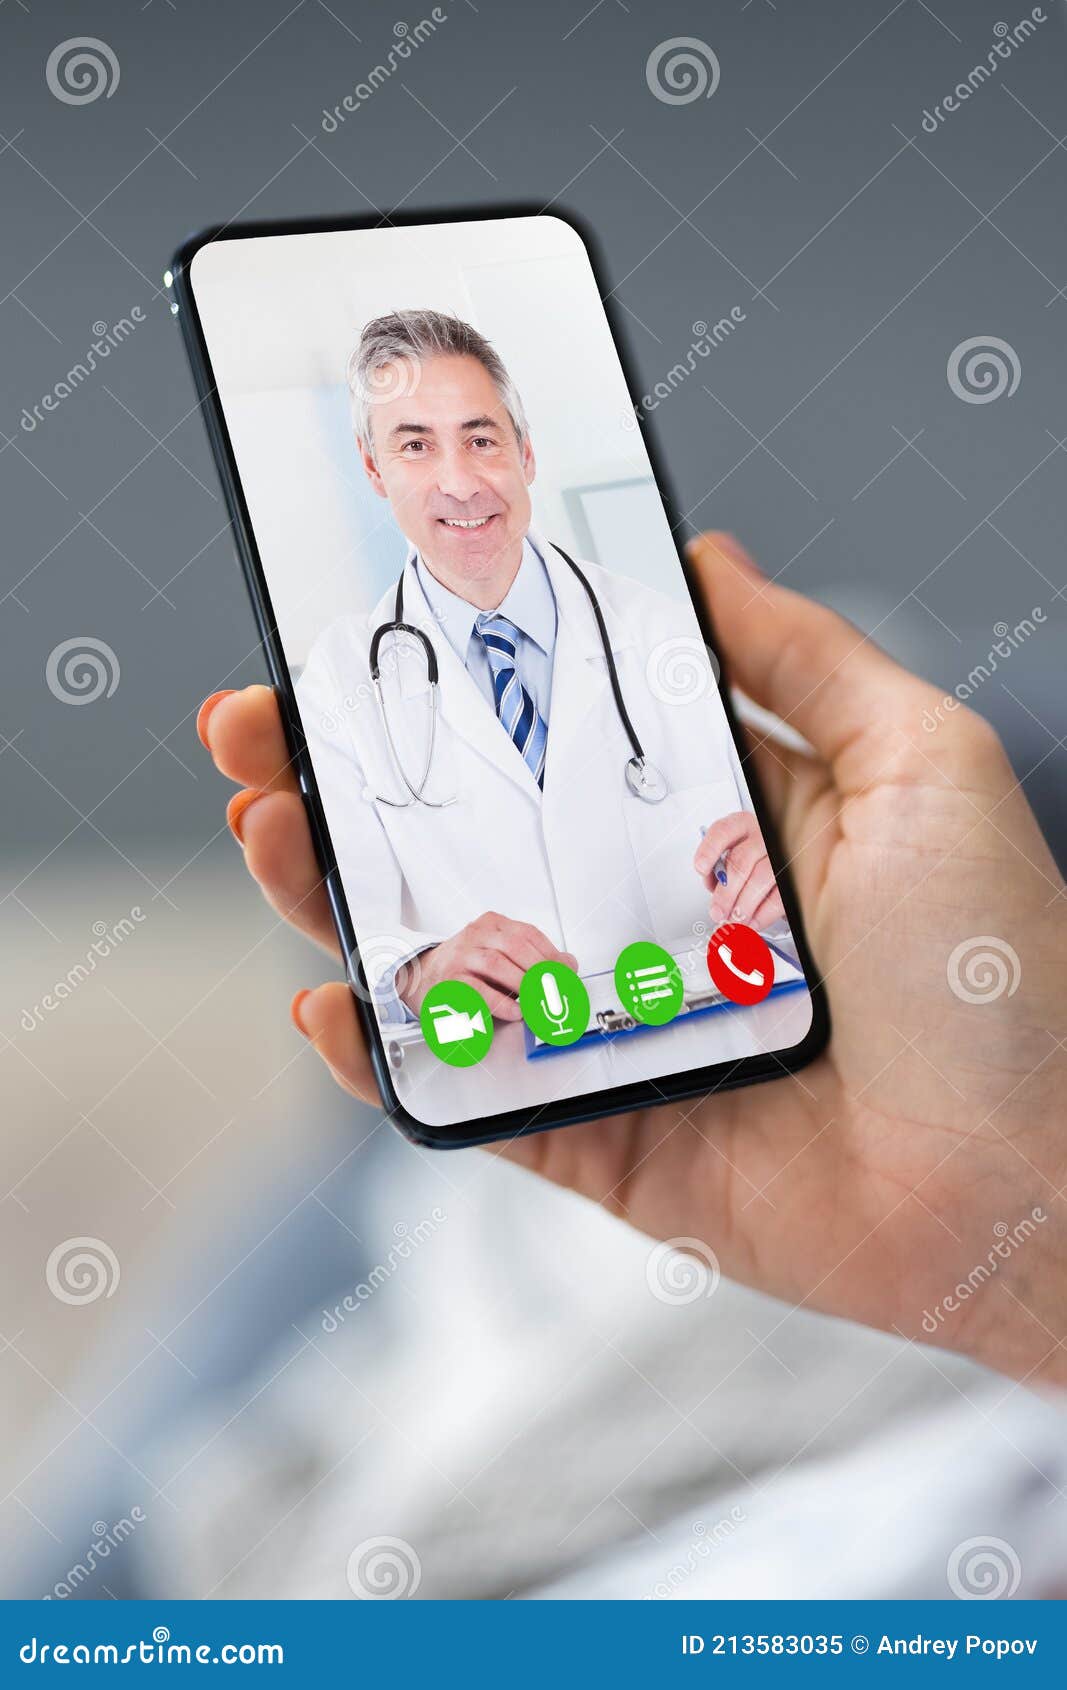 telemedicine video call to doctor